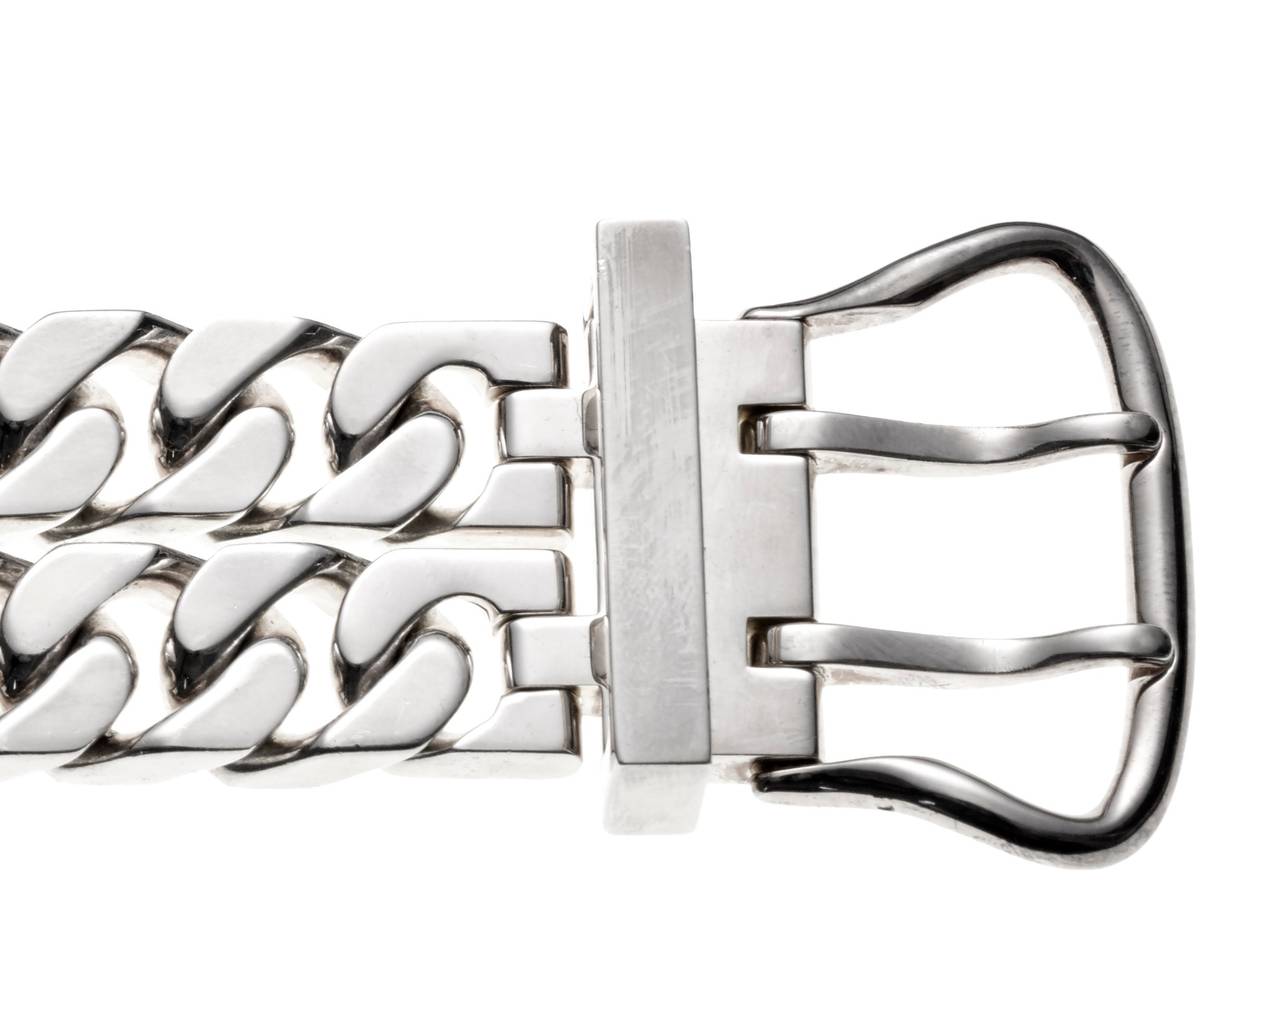 This signed Hermes sterling silver bracelet has a double curb link chain joined by a wide buckle closure. Measures 8